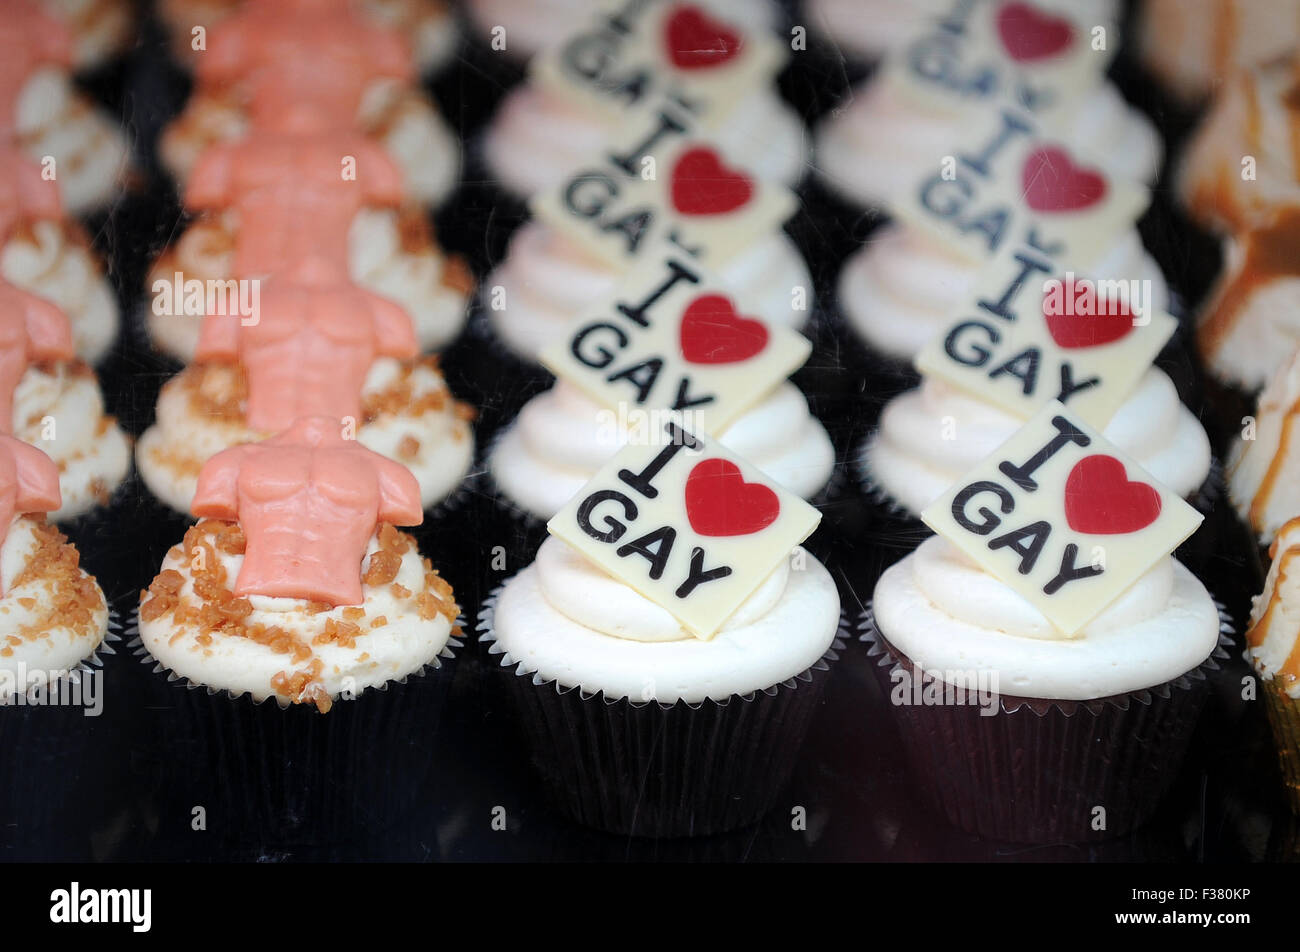 Cupcakes on sale with the words 'I love gay' written on them at a Mardi Gras event. Stock Photo